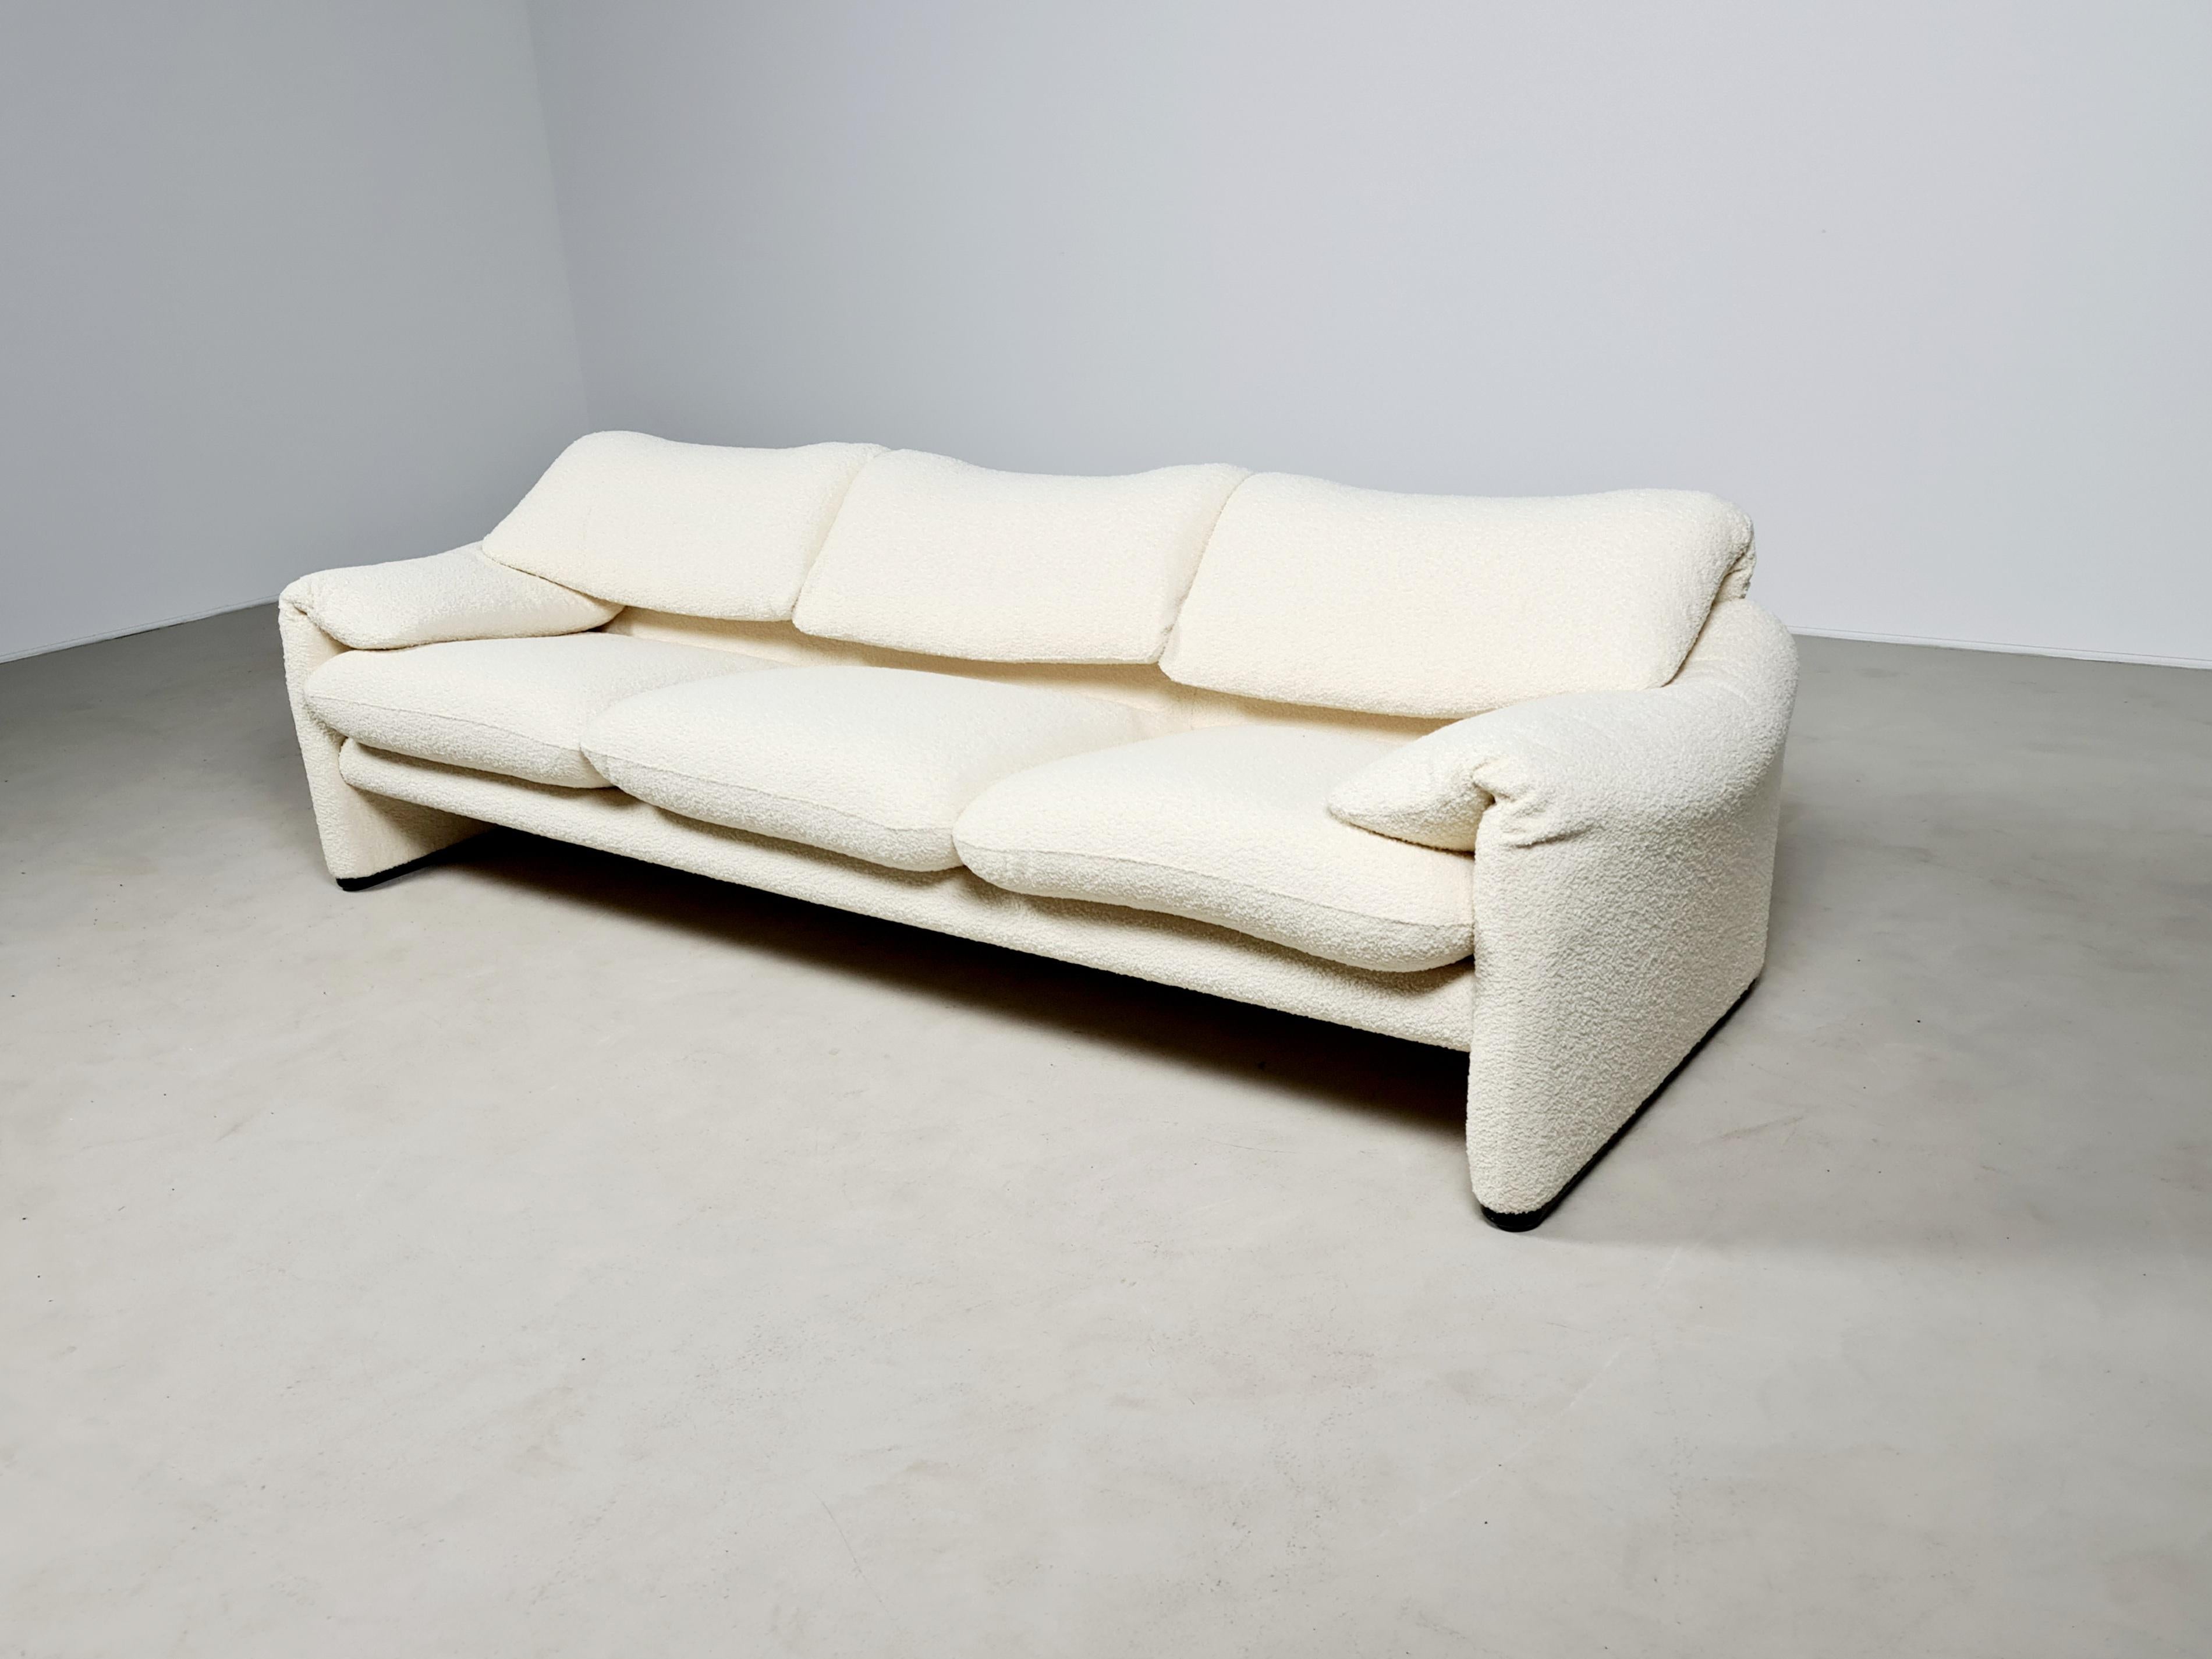 This Maralunga sofa was designed by Vico Magistretti for Cassina in 1973. It is an original version of the seventies. Reupholstered in a creme bouclé by Bisson Bruneel. With steel structure. The backrests can be raised or lowered for total comfort.